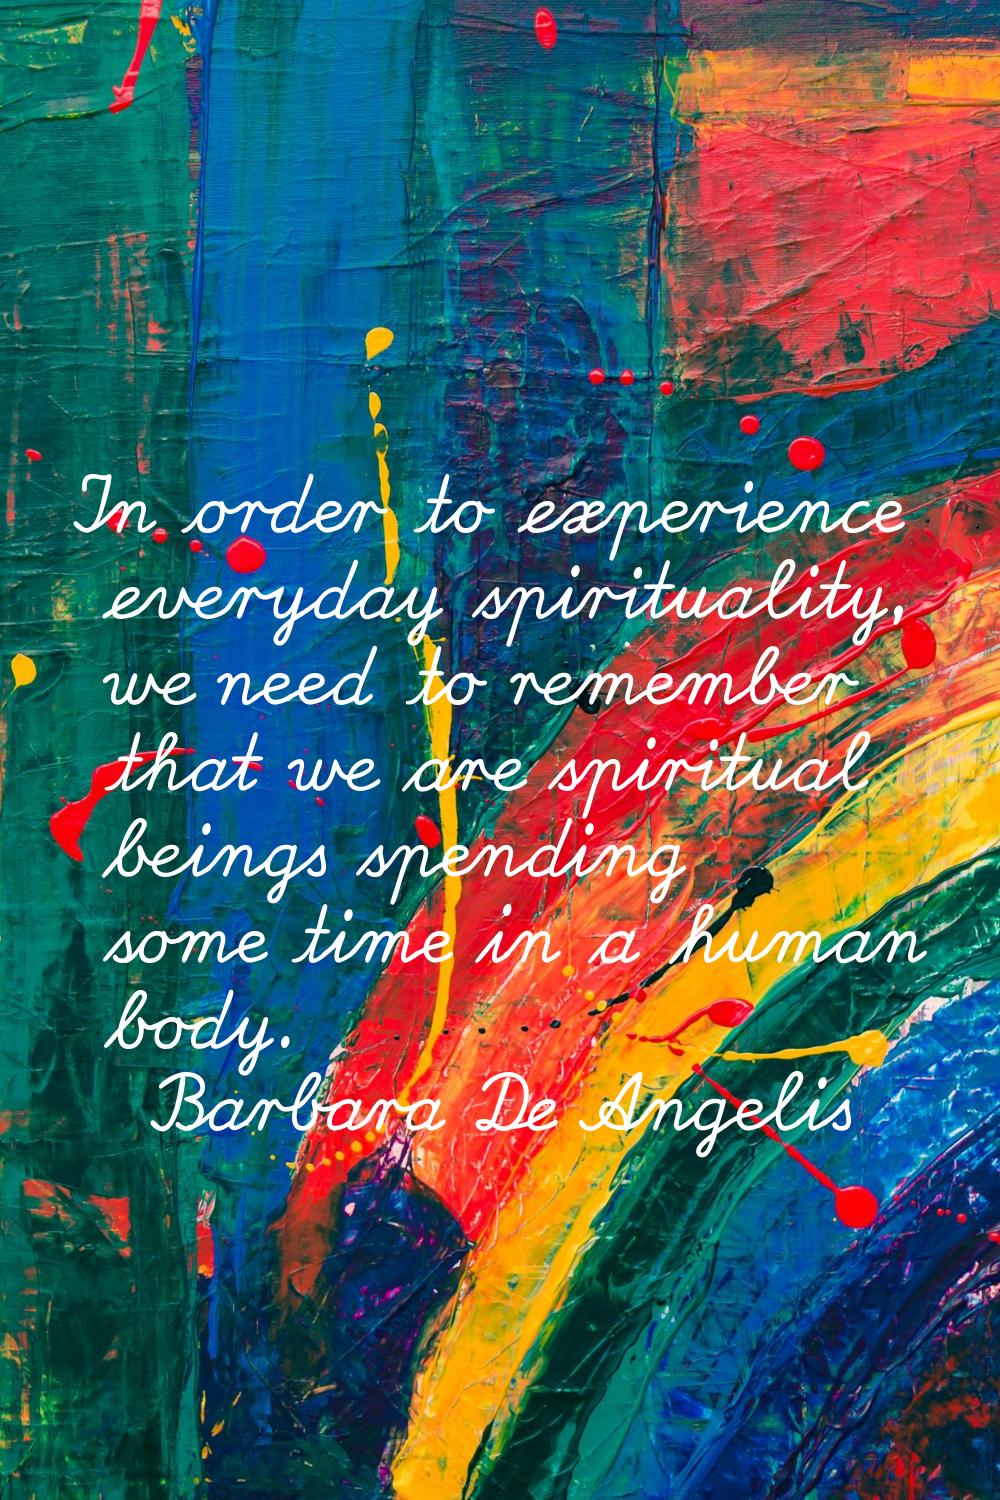 In order to experience everyday spirituality, we need to remember that we are spiritual beings spen